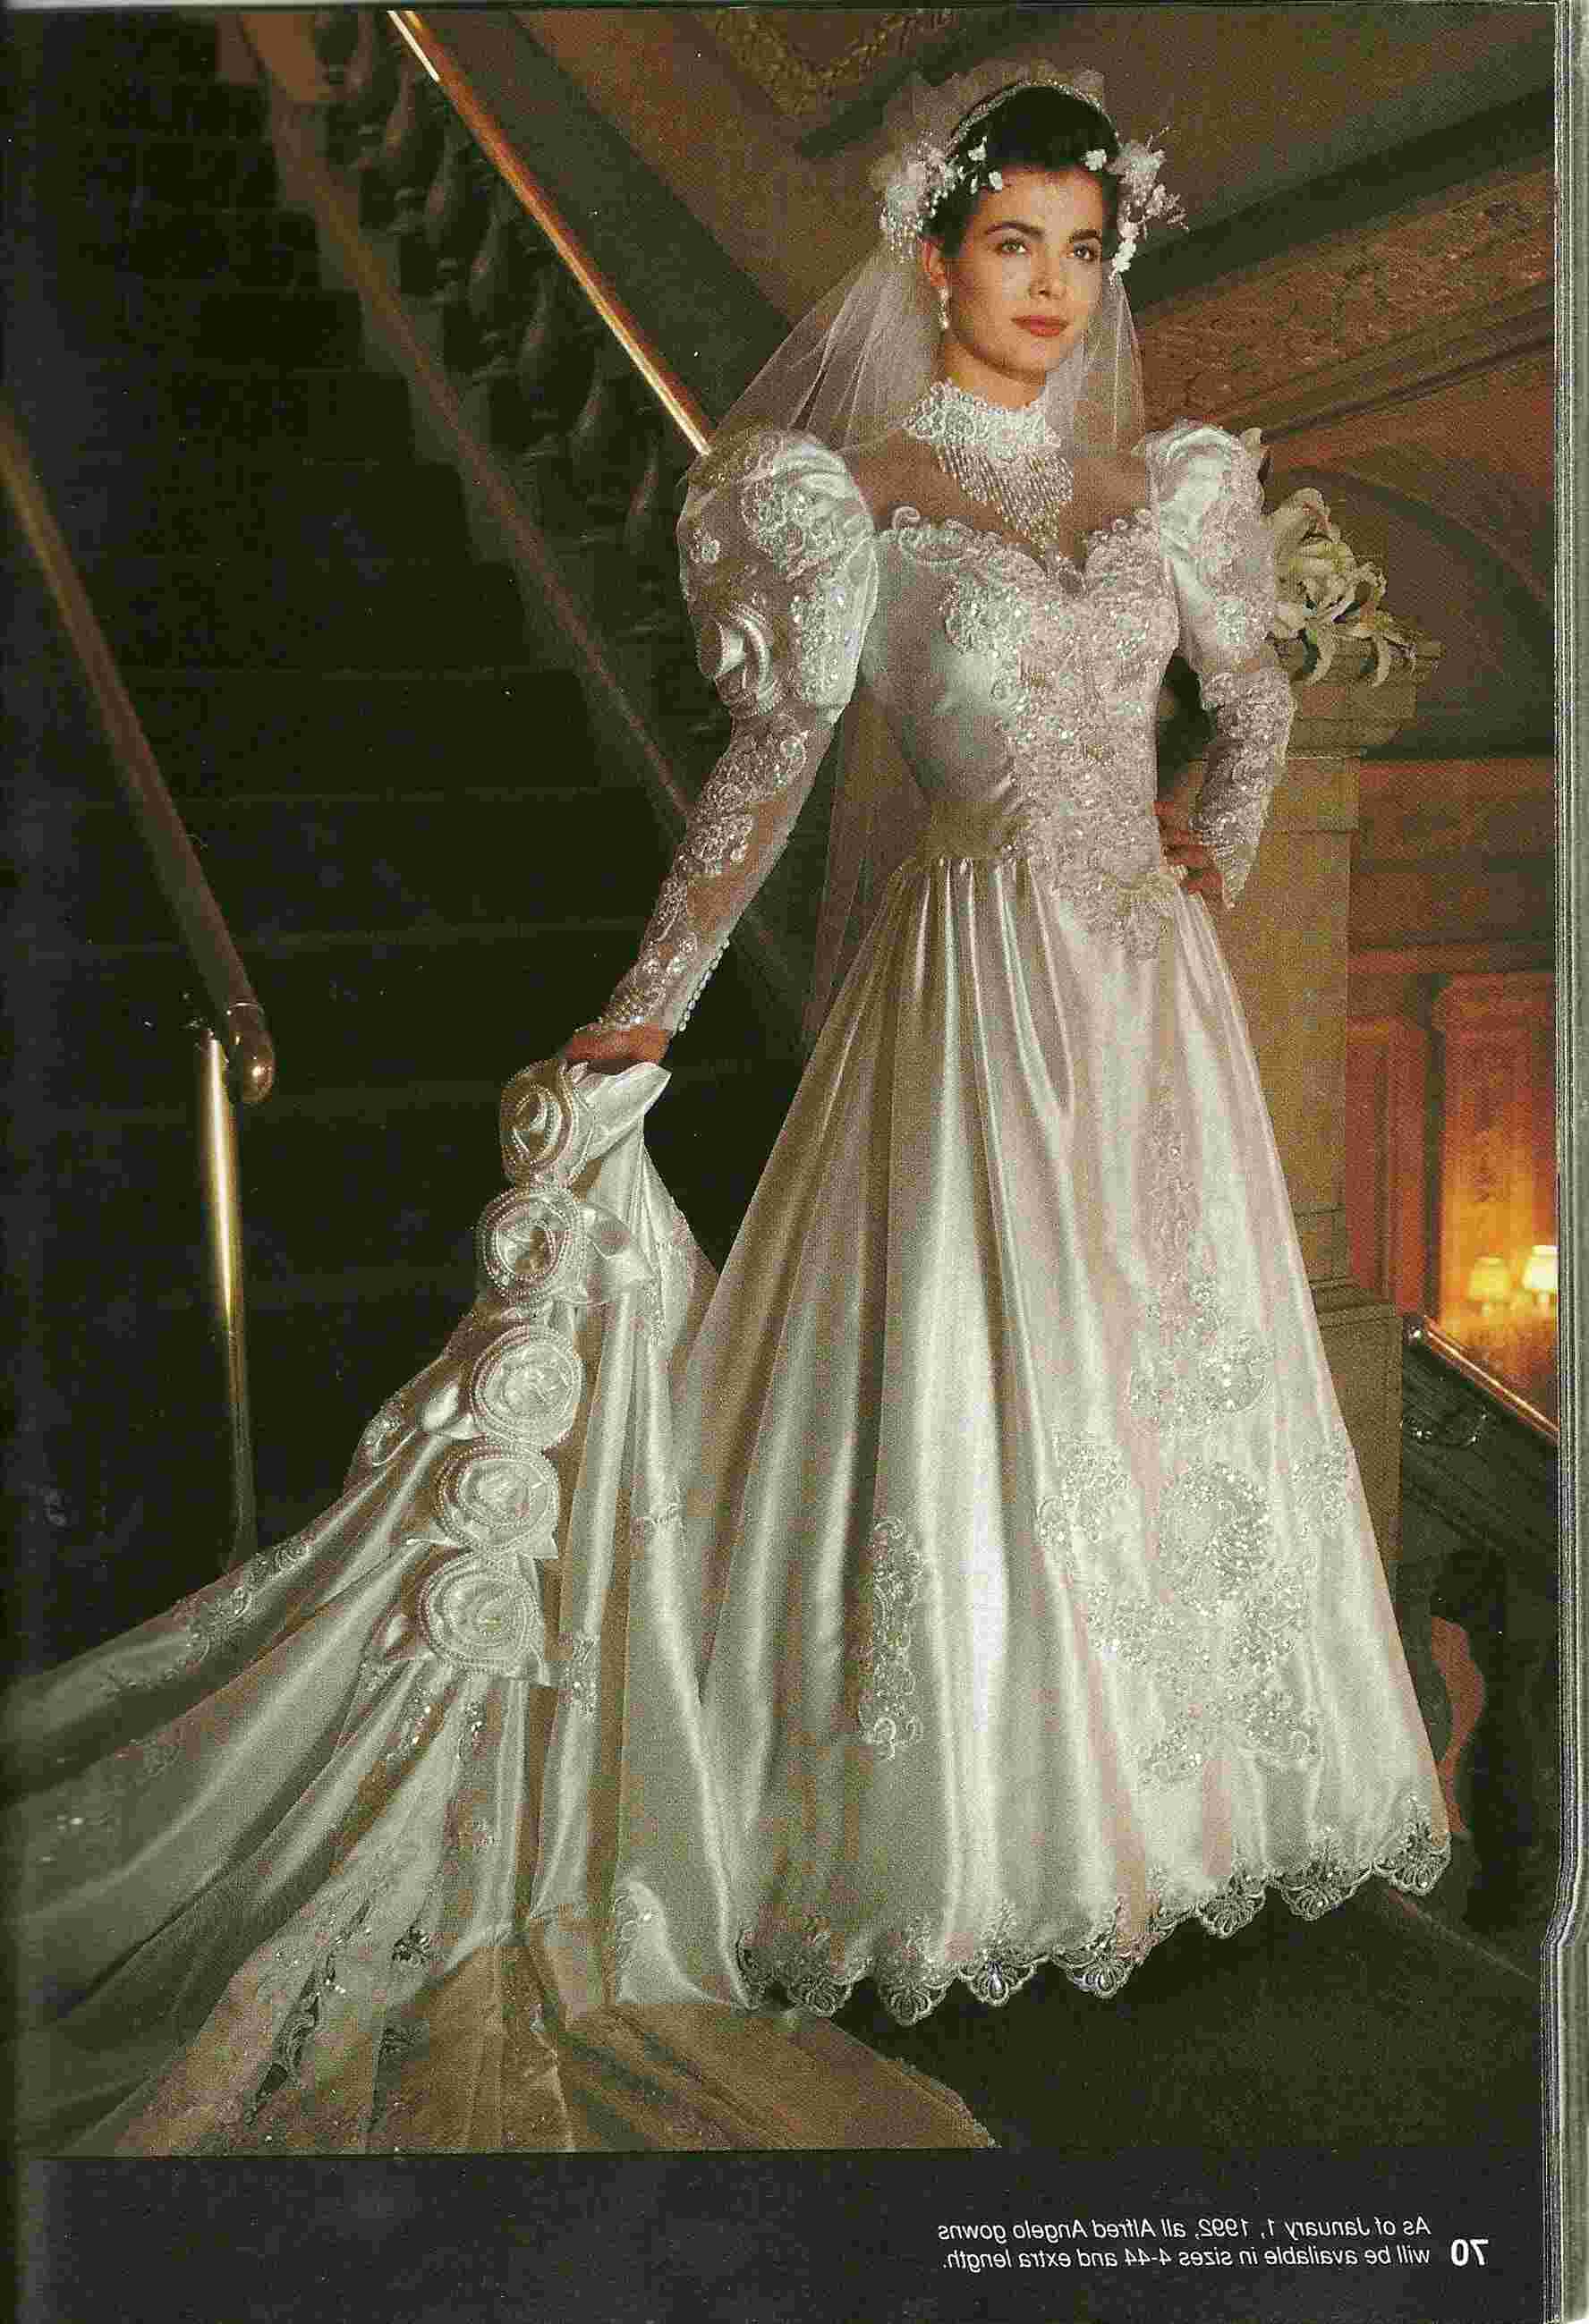 80S Wedding Dress for sale in UK View 40 bargains